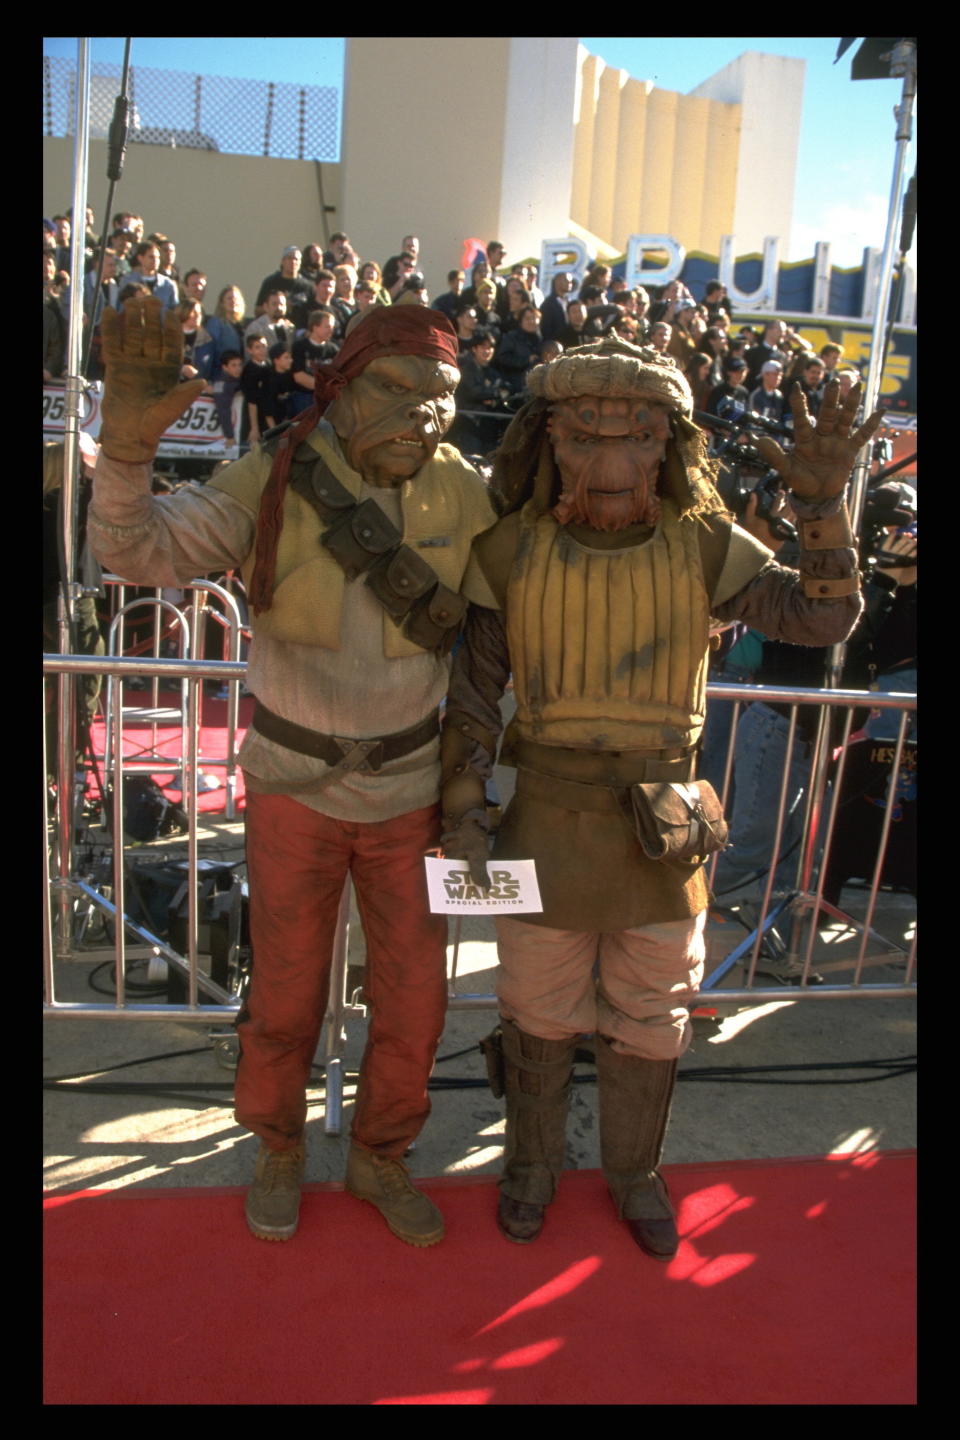 LOS ANGELES PREMIERE OF NEW 'STAR WARS' FILM (Photo by Frank Trapper/Corbis via Getty Images)